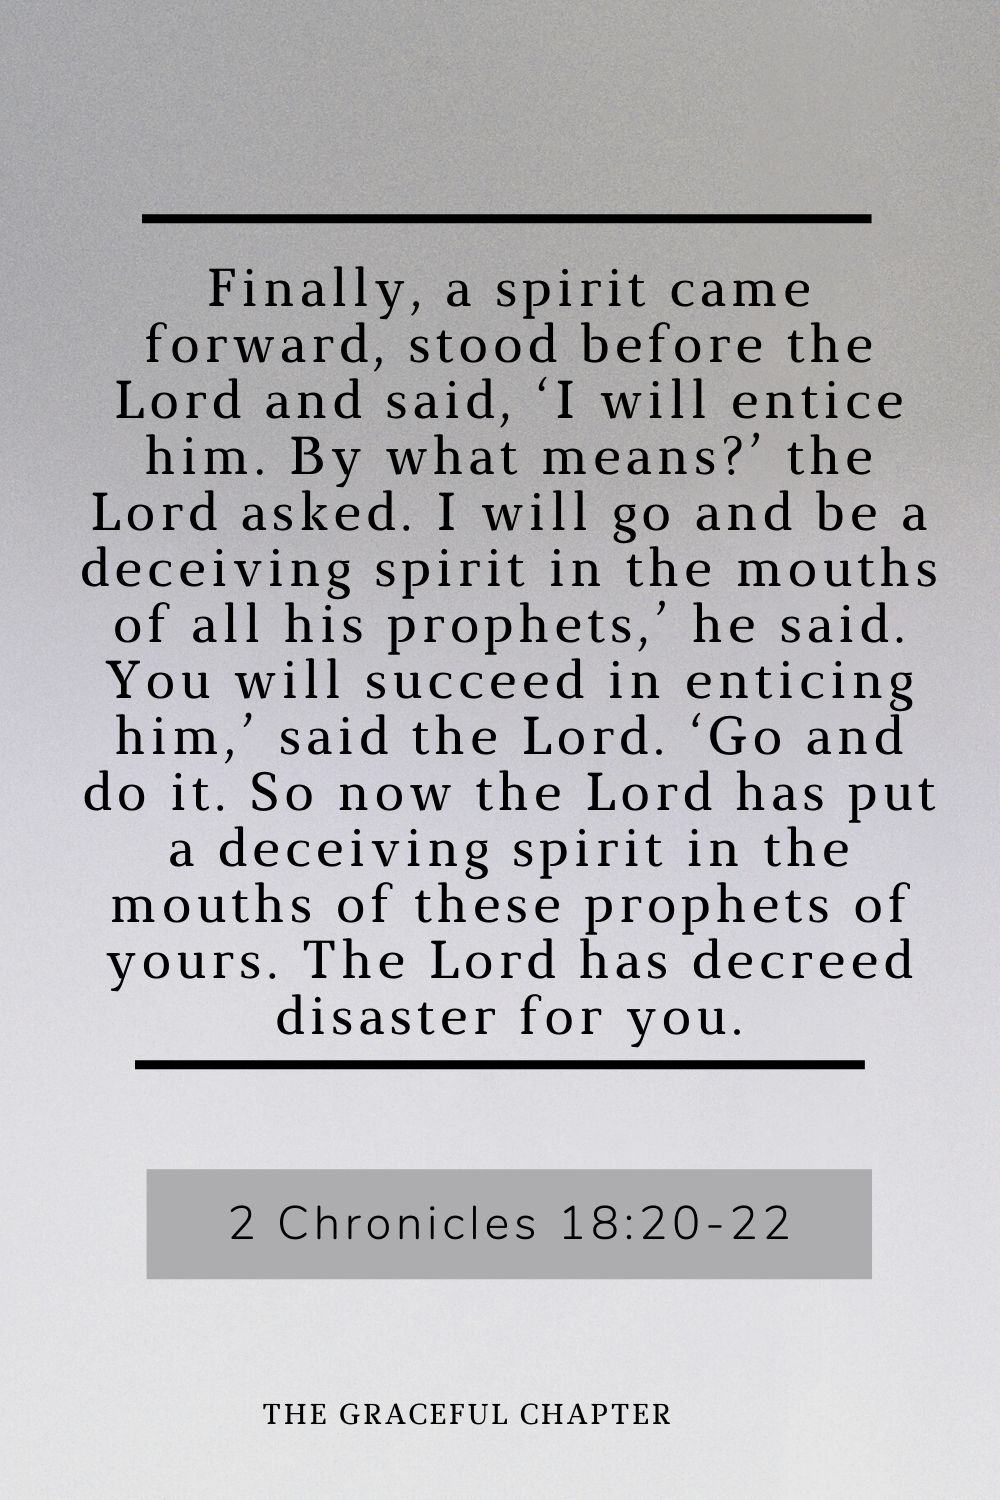 Finally, a spirit came forward, stood before the Lord and said, ‘I will entice him. By what means?’ the Lord asked. I will go and be a deceiving spirit in the mouths of all his prophets,’ he said. You will succeed in enticing him,’ said the Lord. ‘Go and do it. So now the Lord has put a deceiving spirit in the mouths of these prophets of yours. The Lord has decreed disaster for you. 2 Chronicles 18:20-22